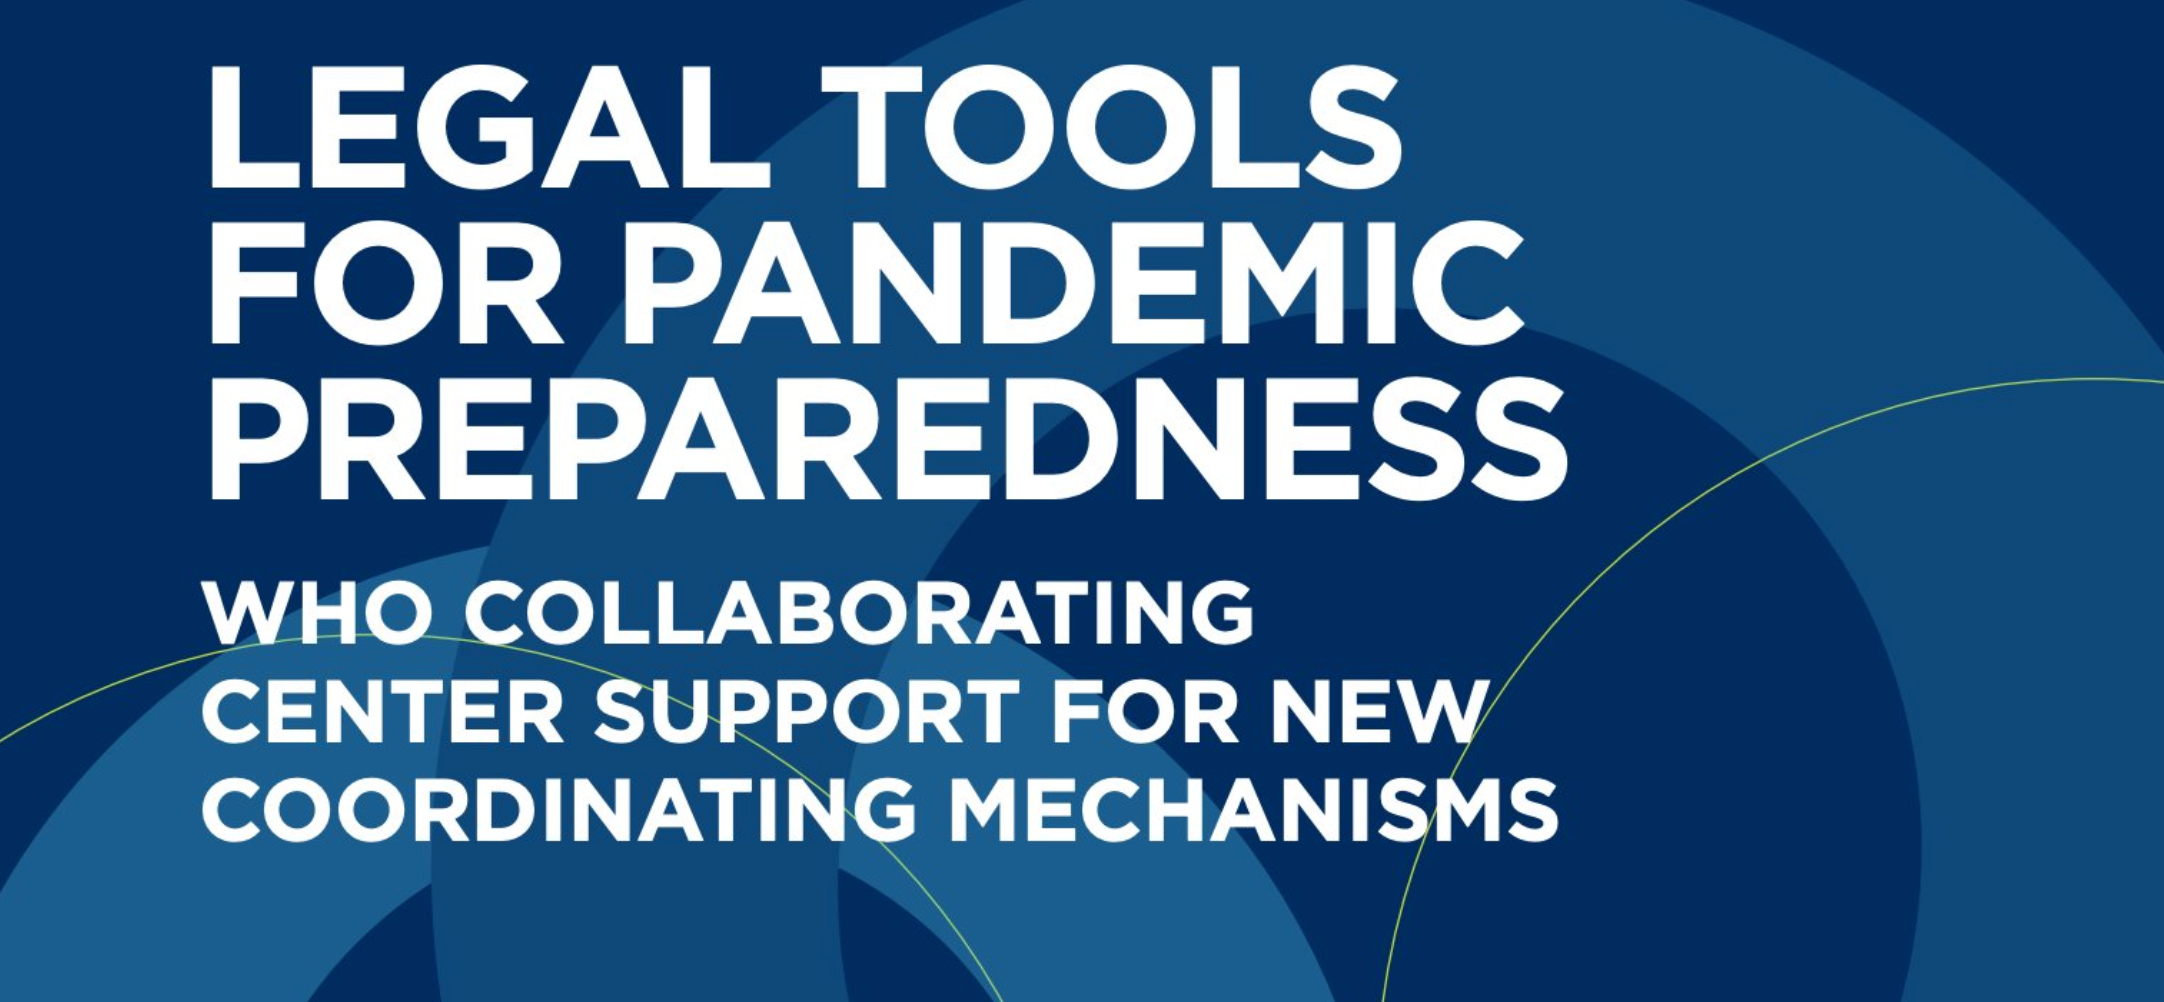 Legal Tools for Pandemic Preparedness: WHO Collaborating Center Support for New Coordinating Mechanisms